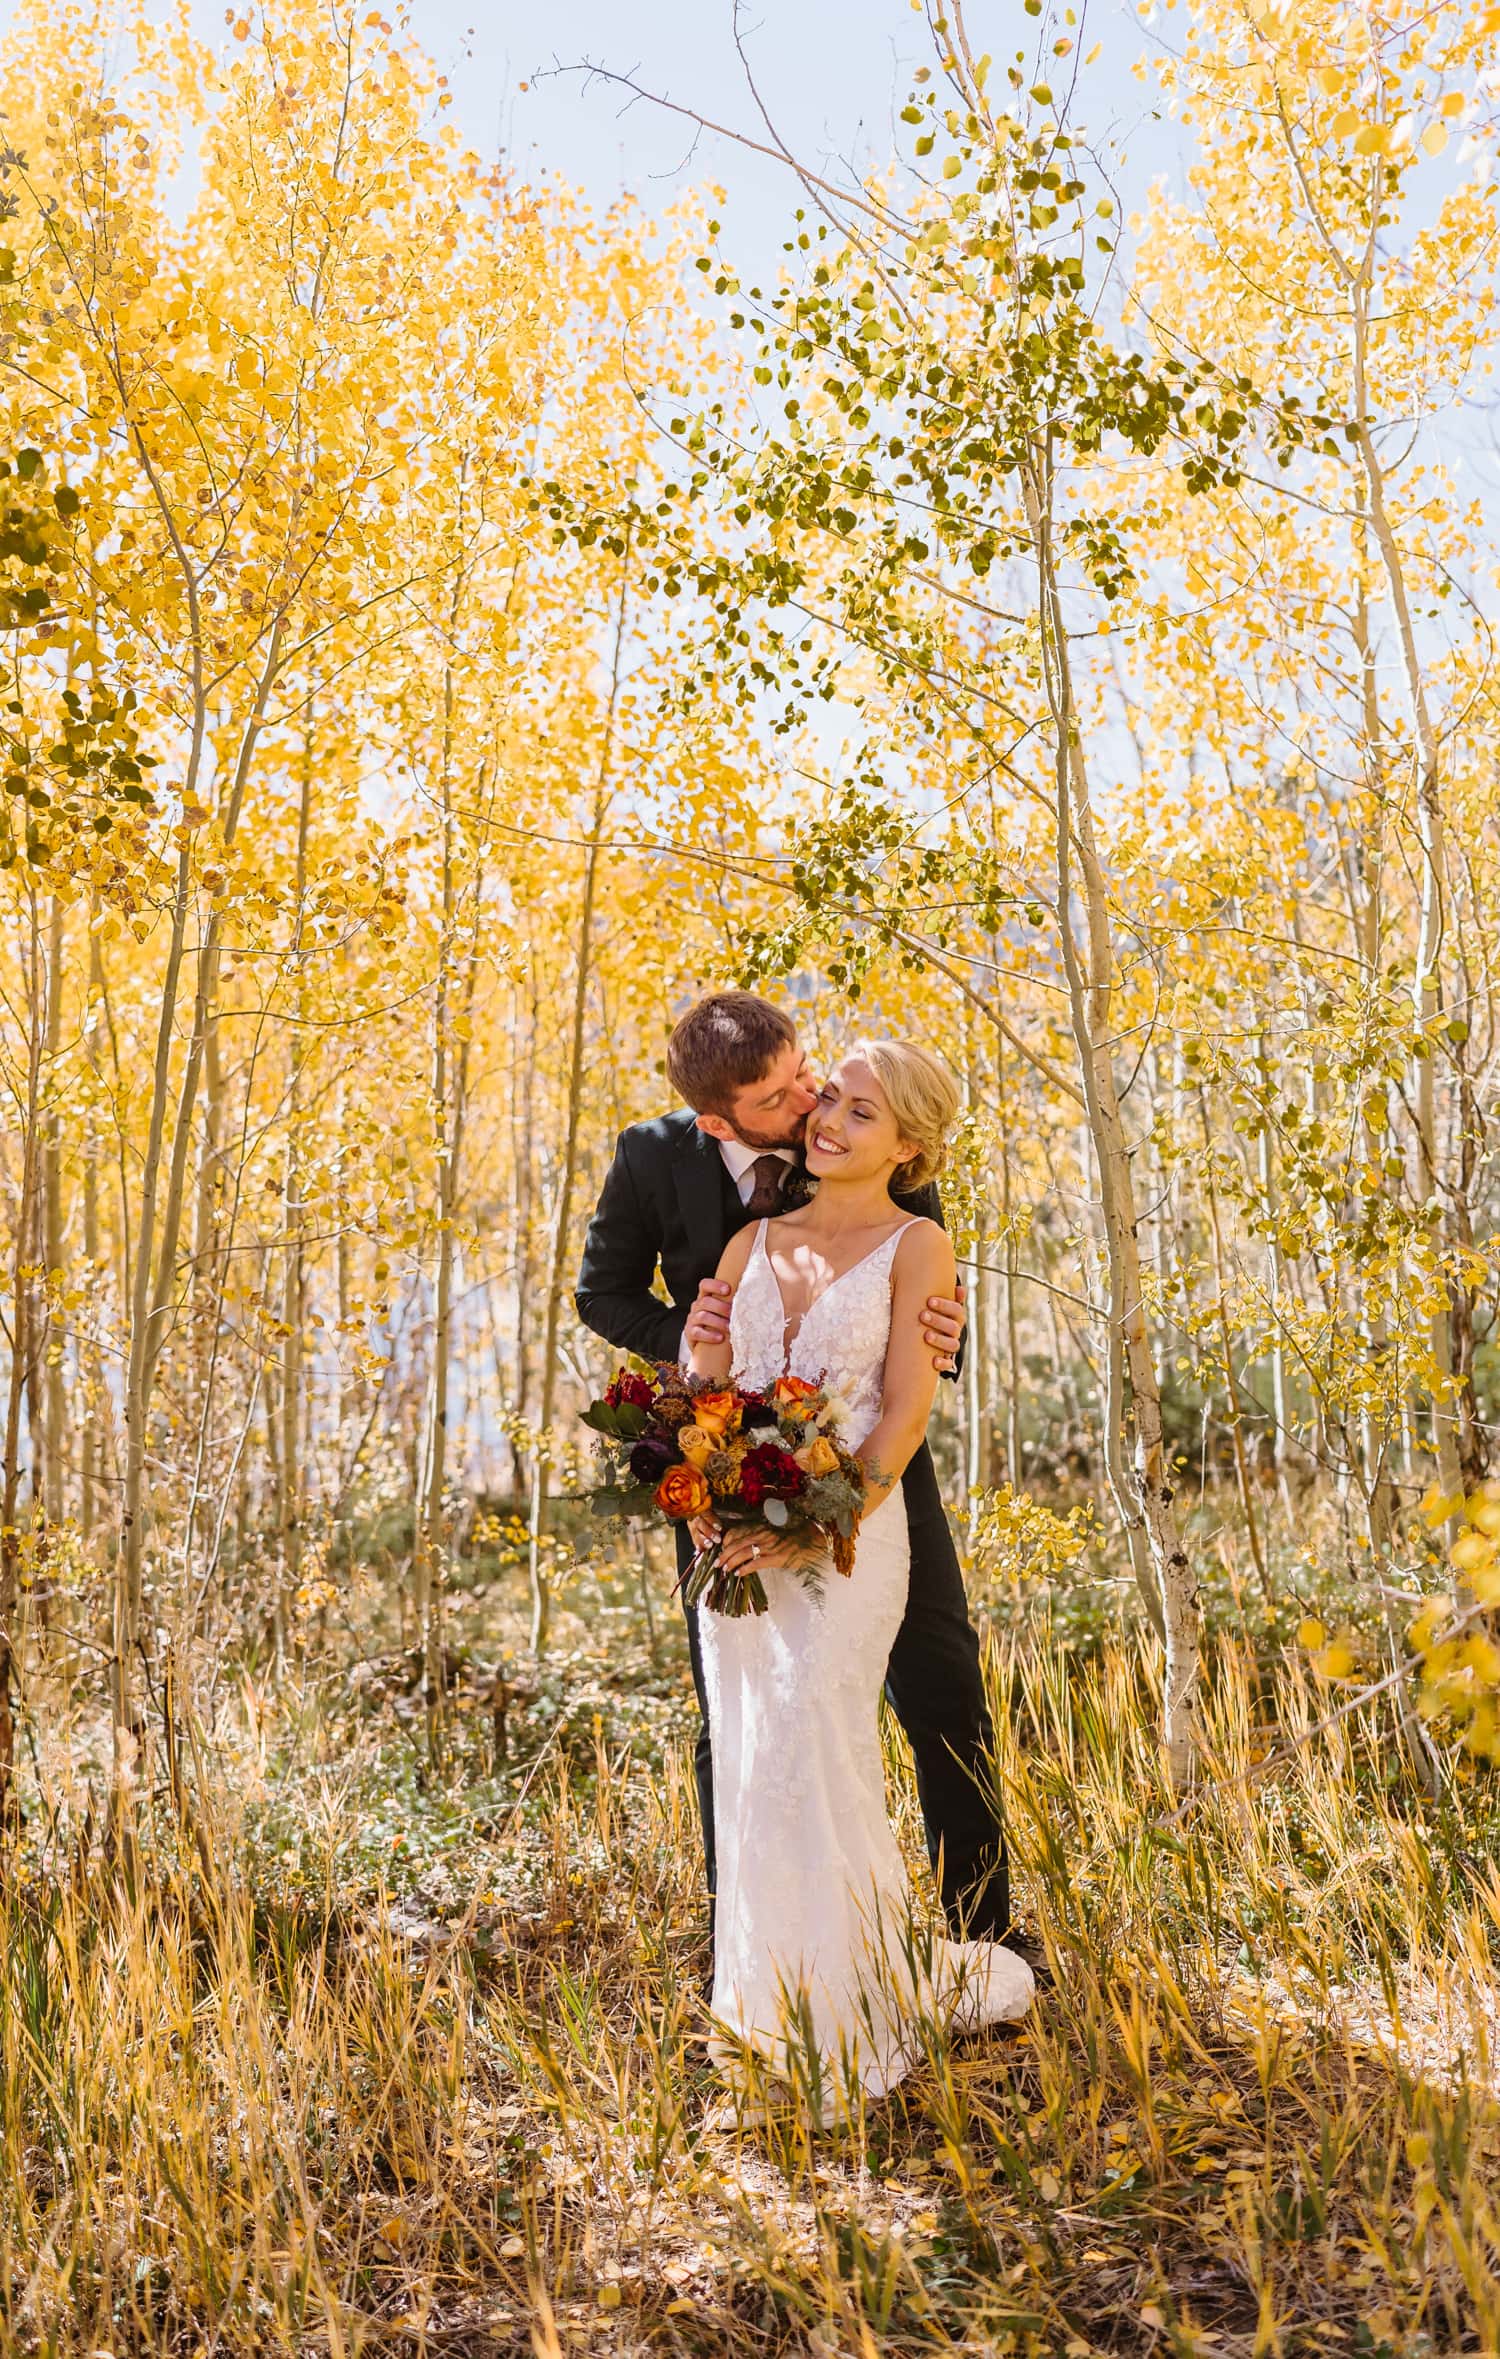 Couple in the fall colors for their Breckenridge, Colorado elopement.